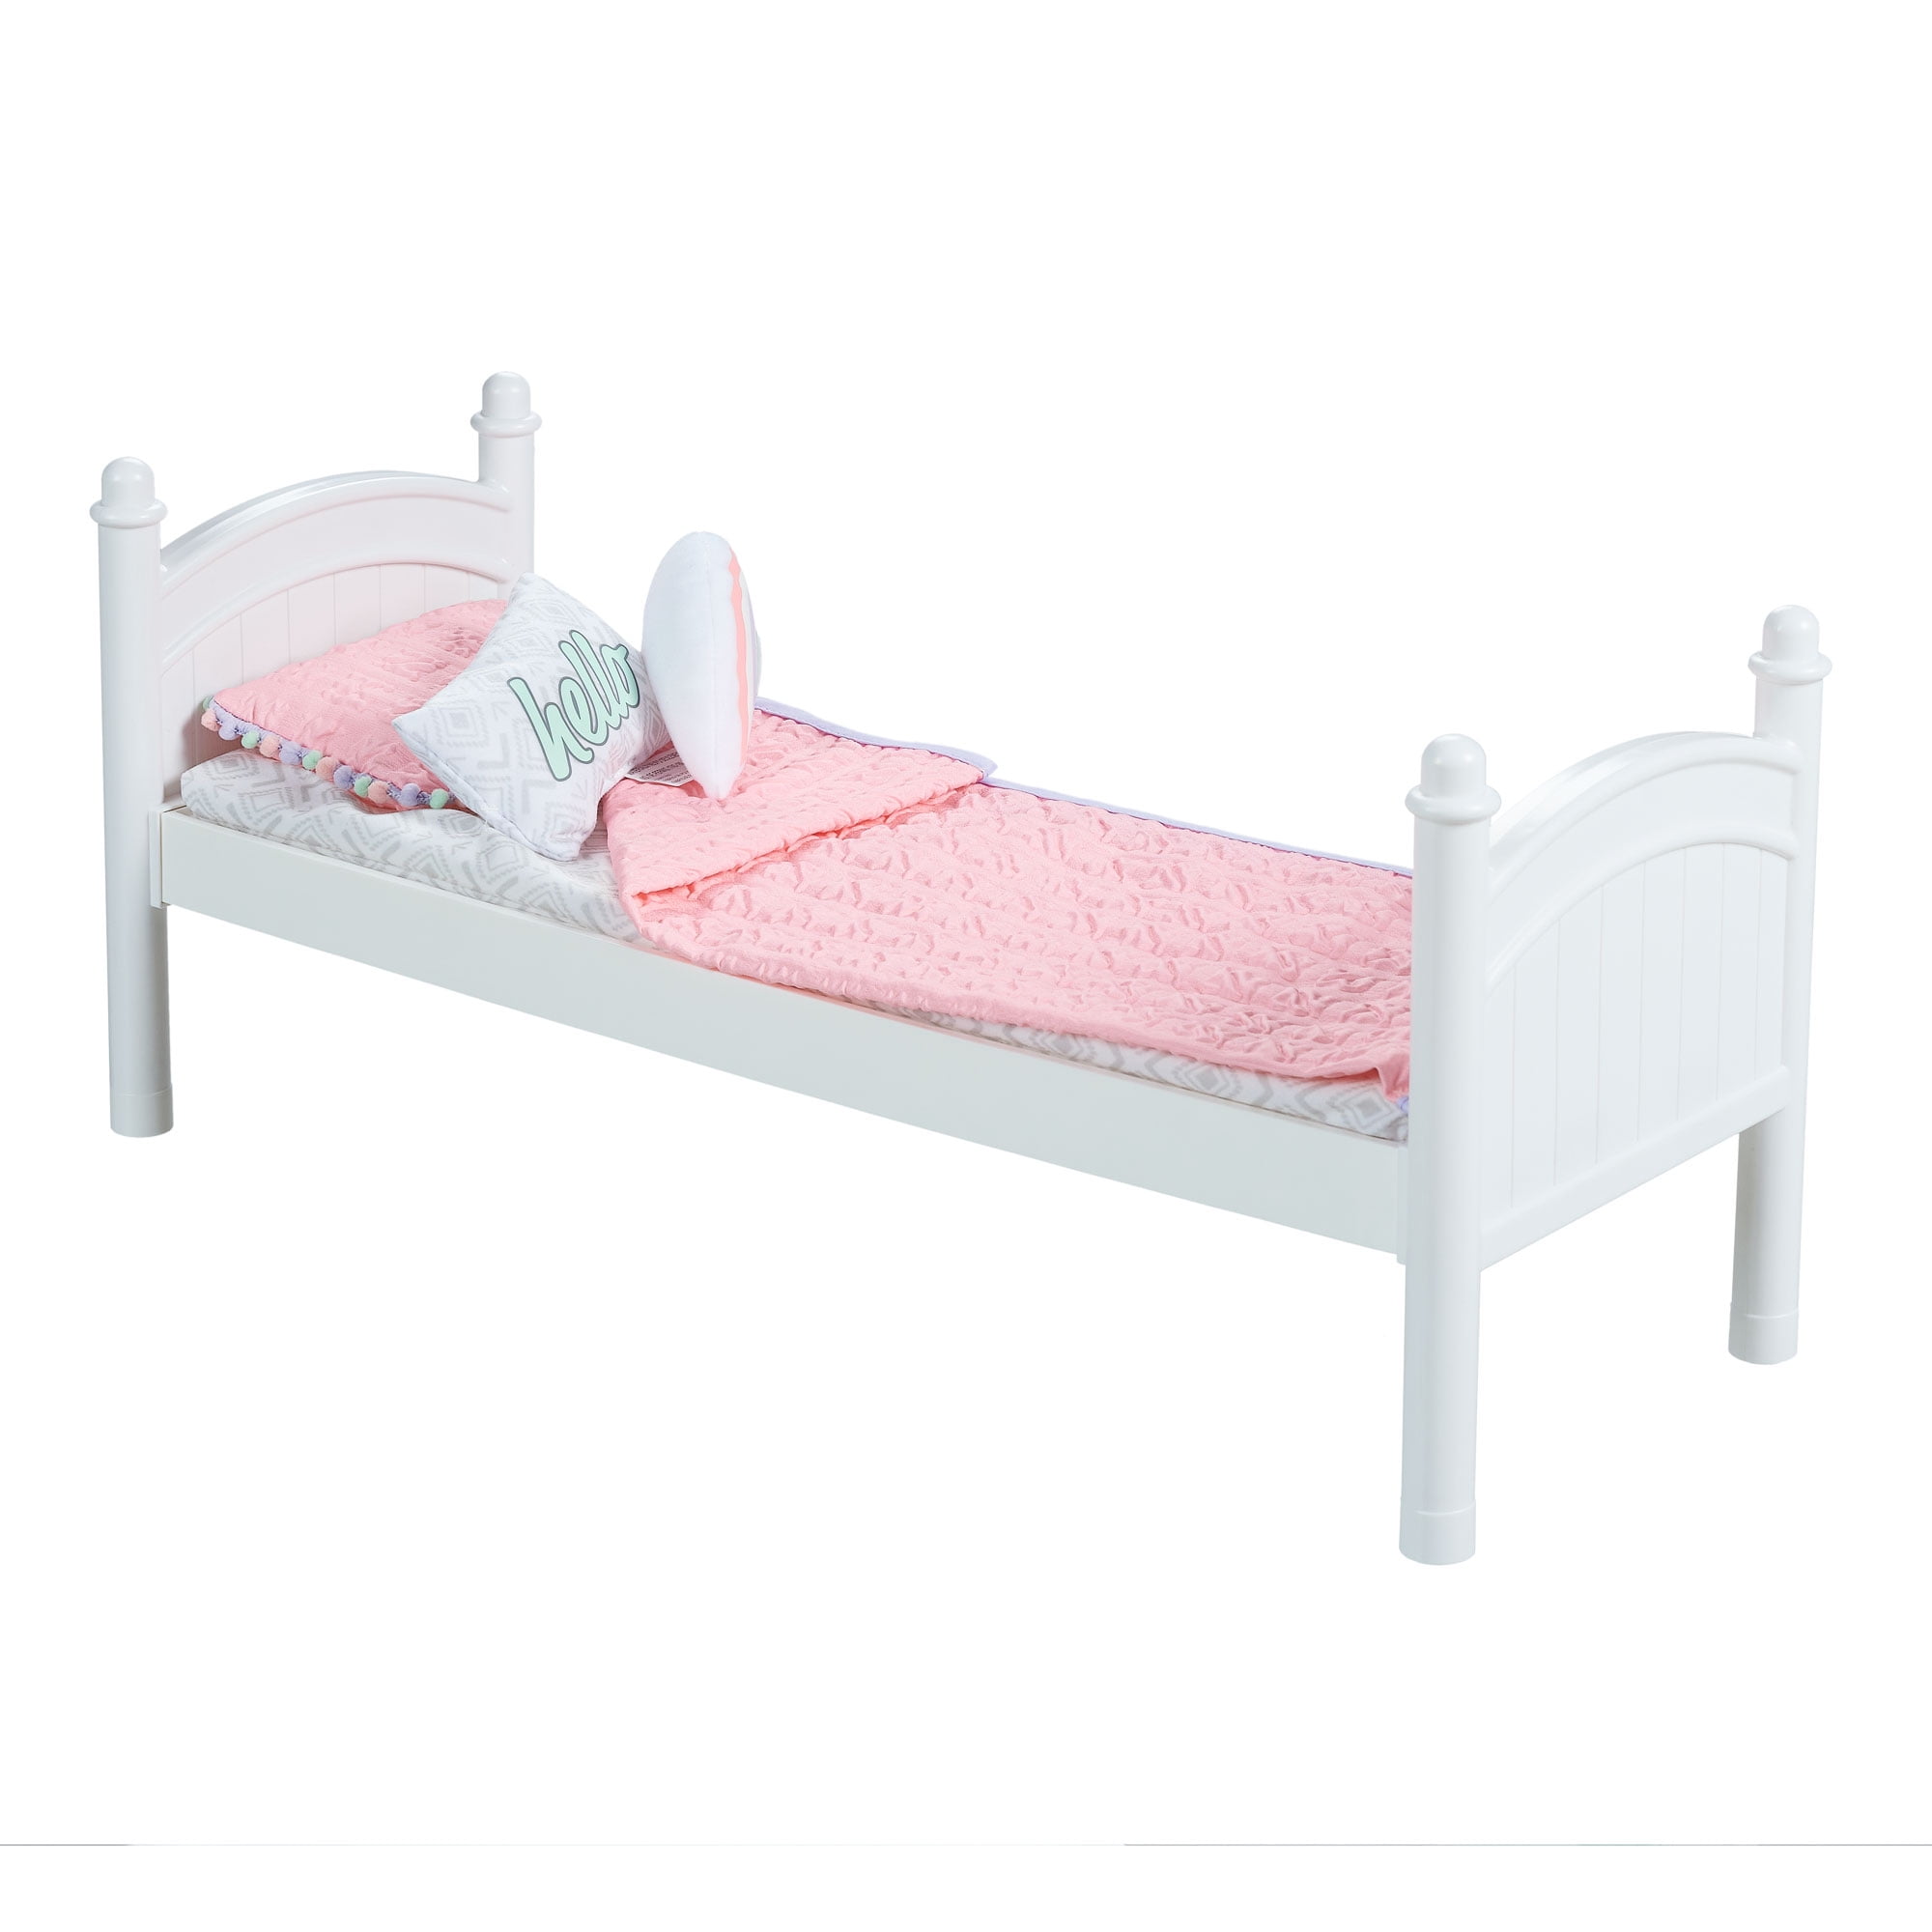 Dolls bedding White/Pink Mattresses for dolls prams or dolls cots various sizes 